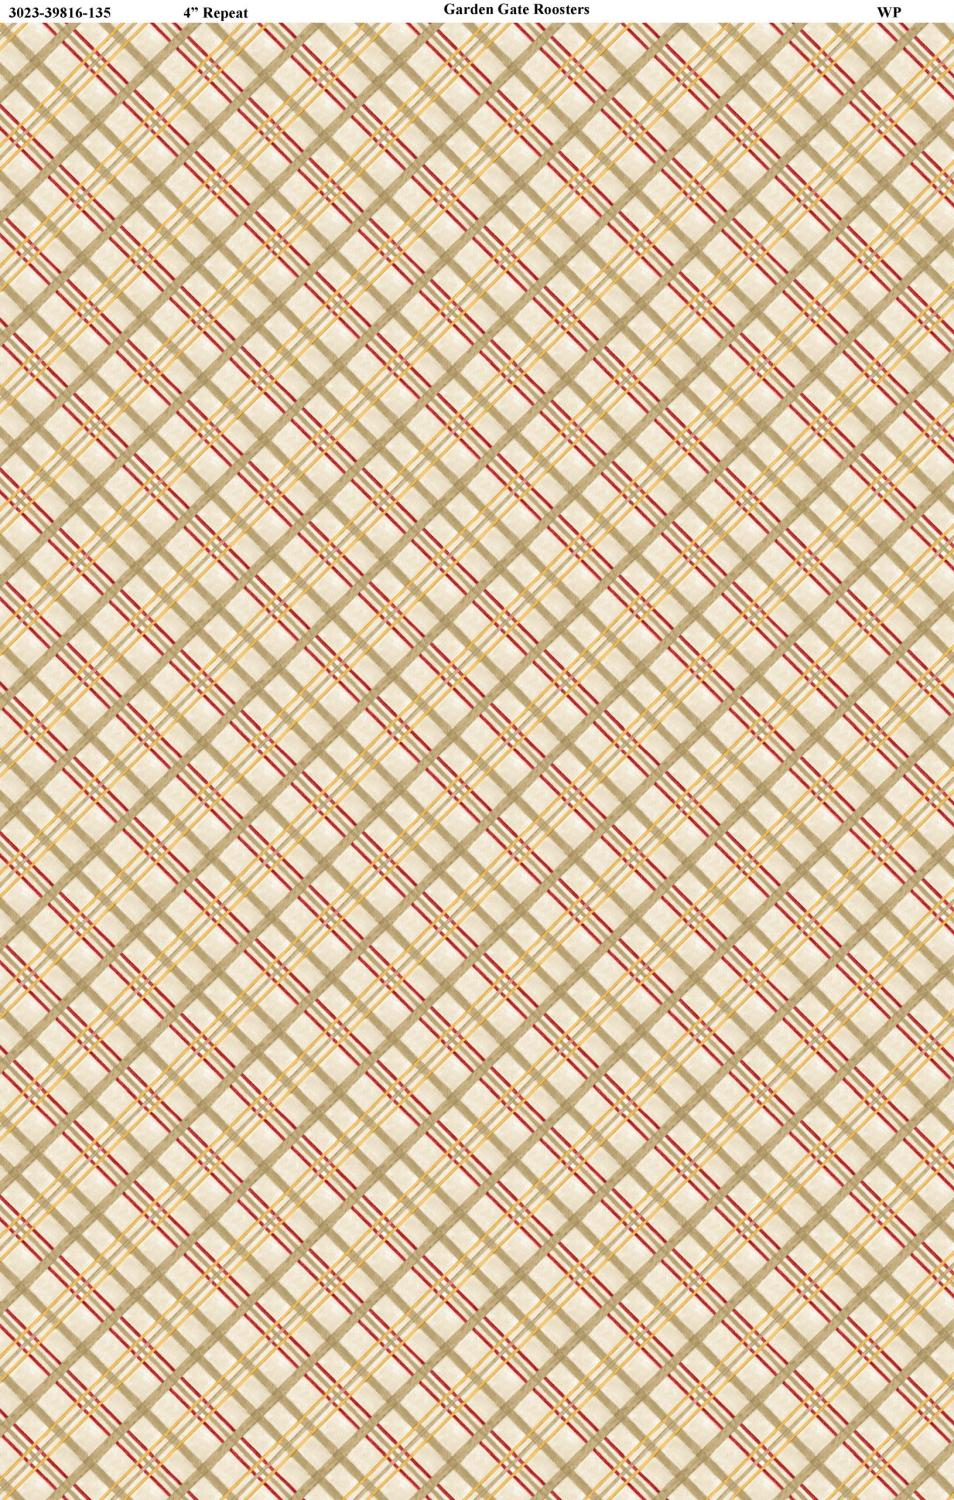 Garden Gate Roosters Plaid Cream